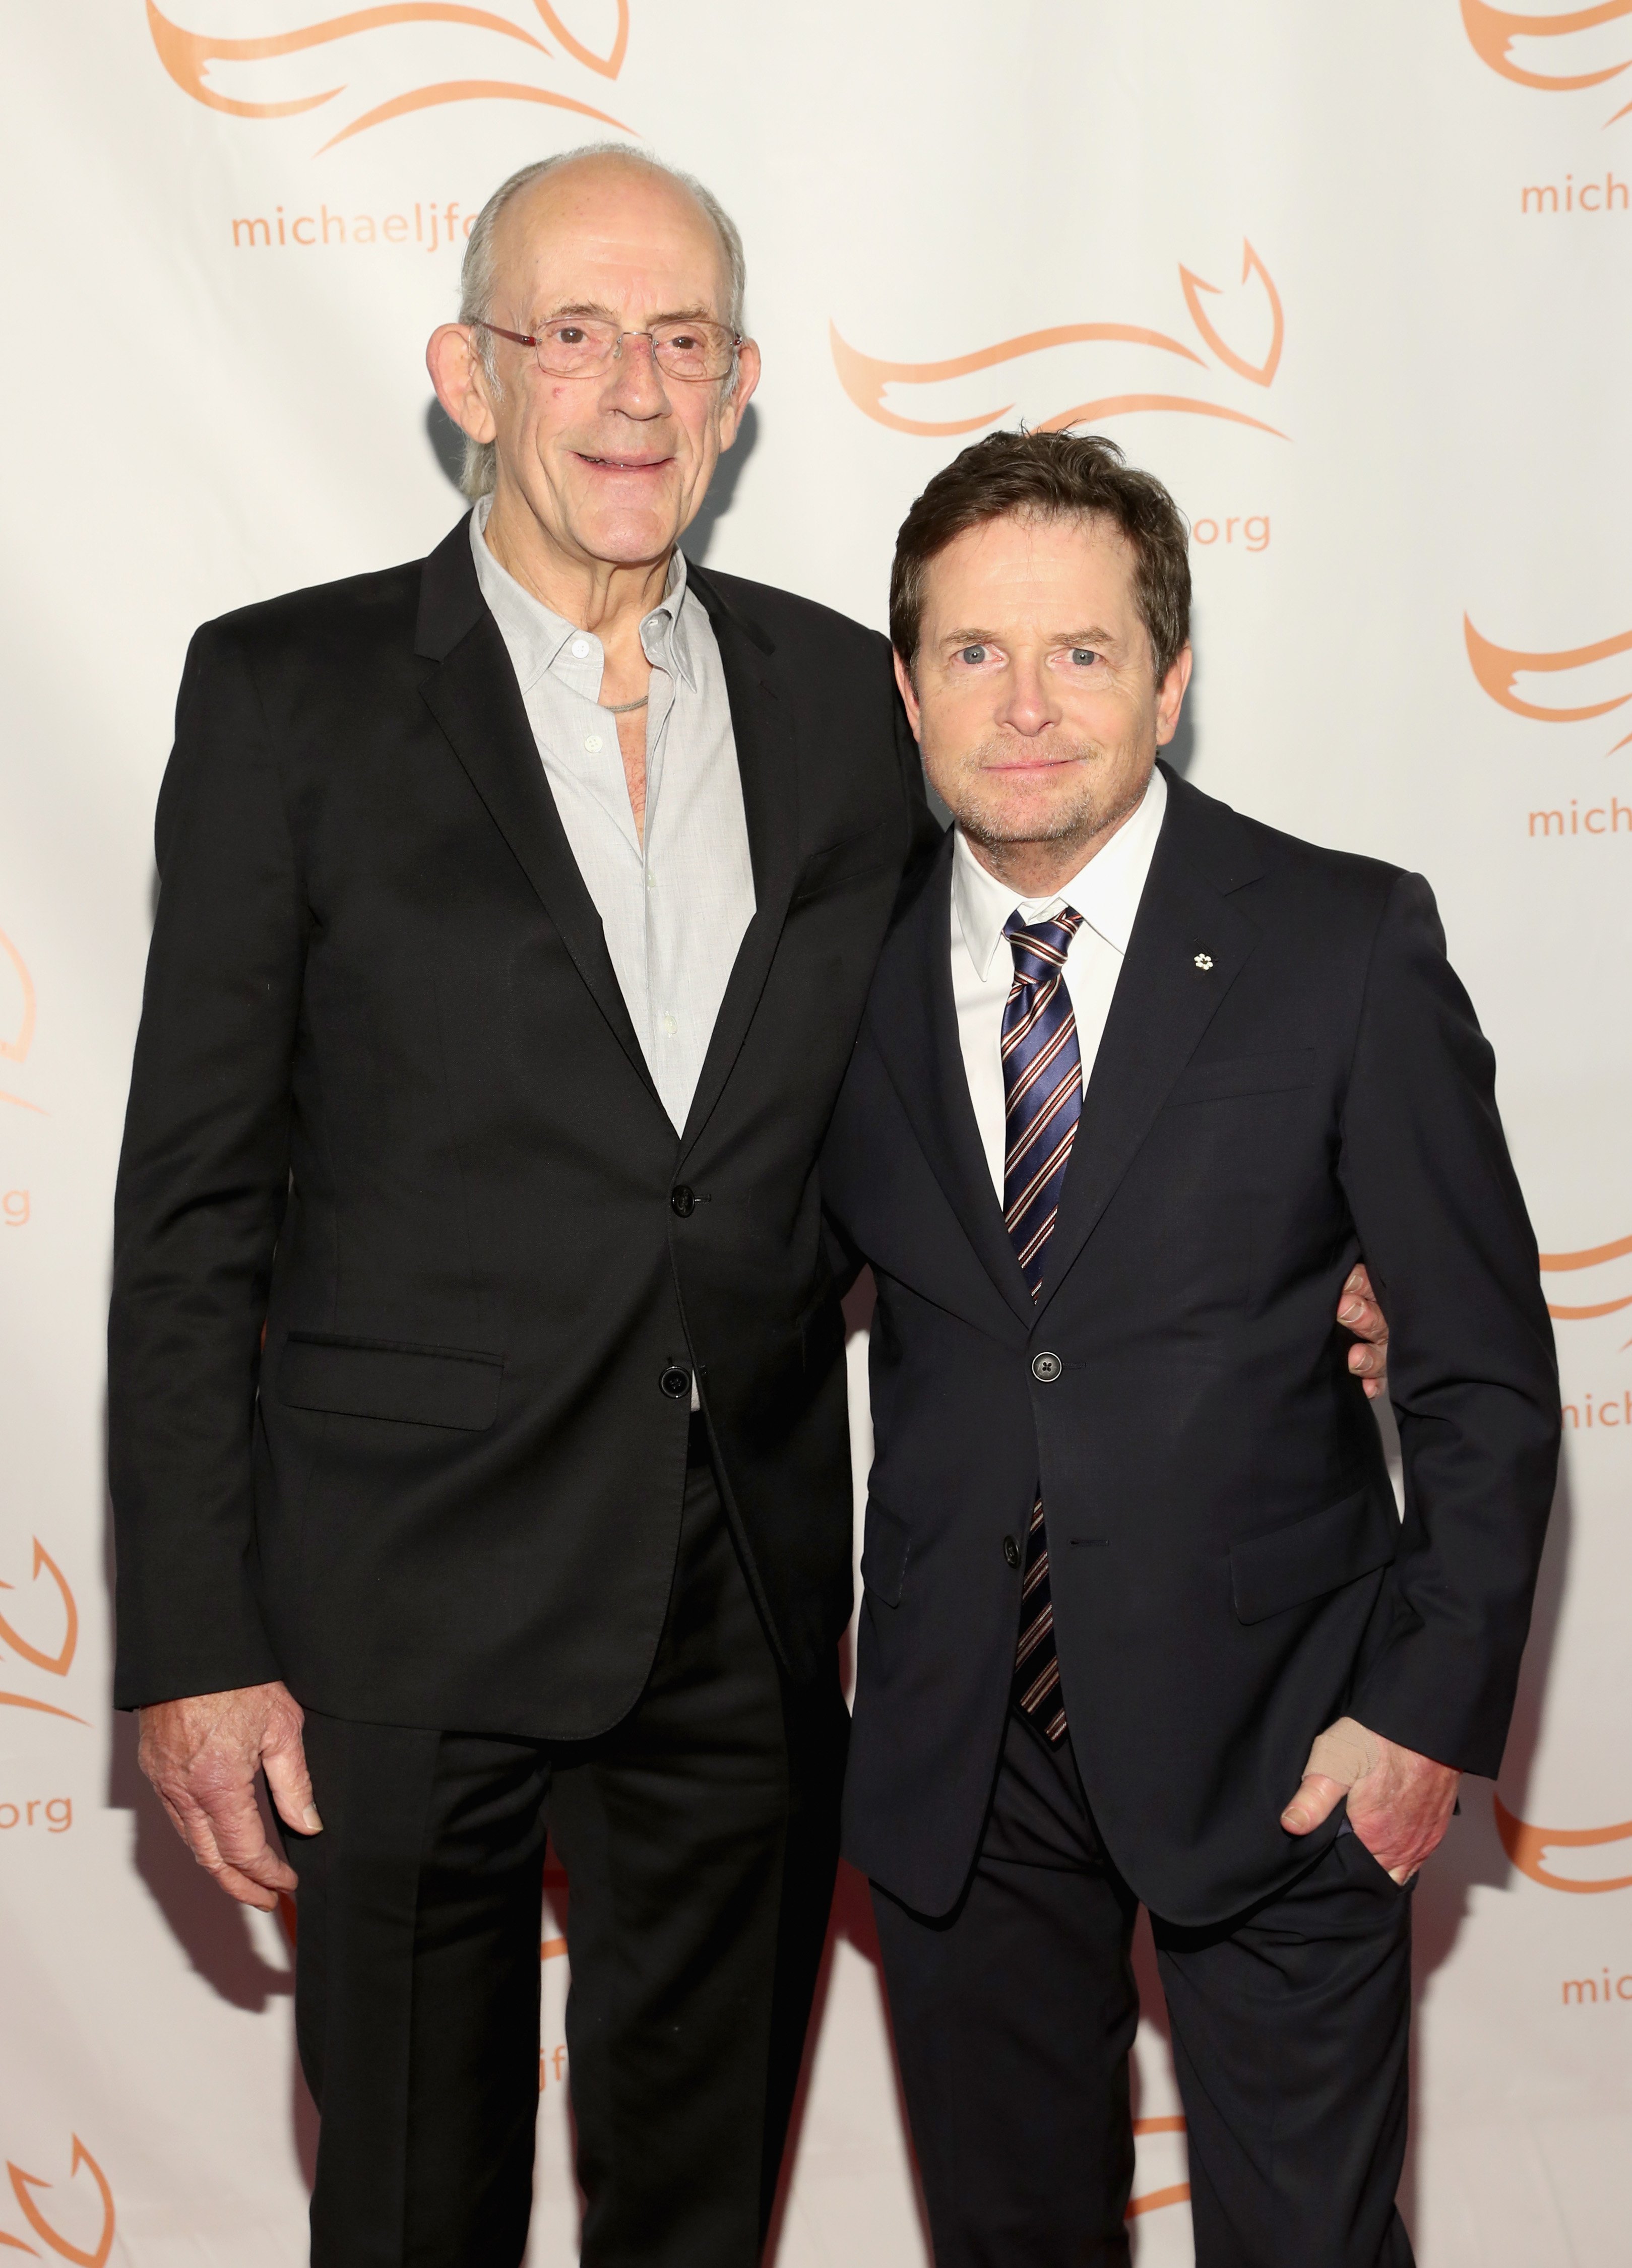 Christopher Lloyd and Michael J Fox at a Foundation November 2018 Benefit Gala in New York | Photo: Getty Images